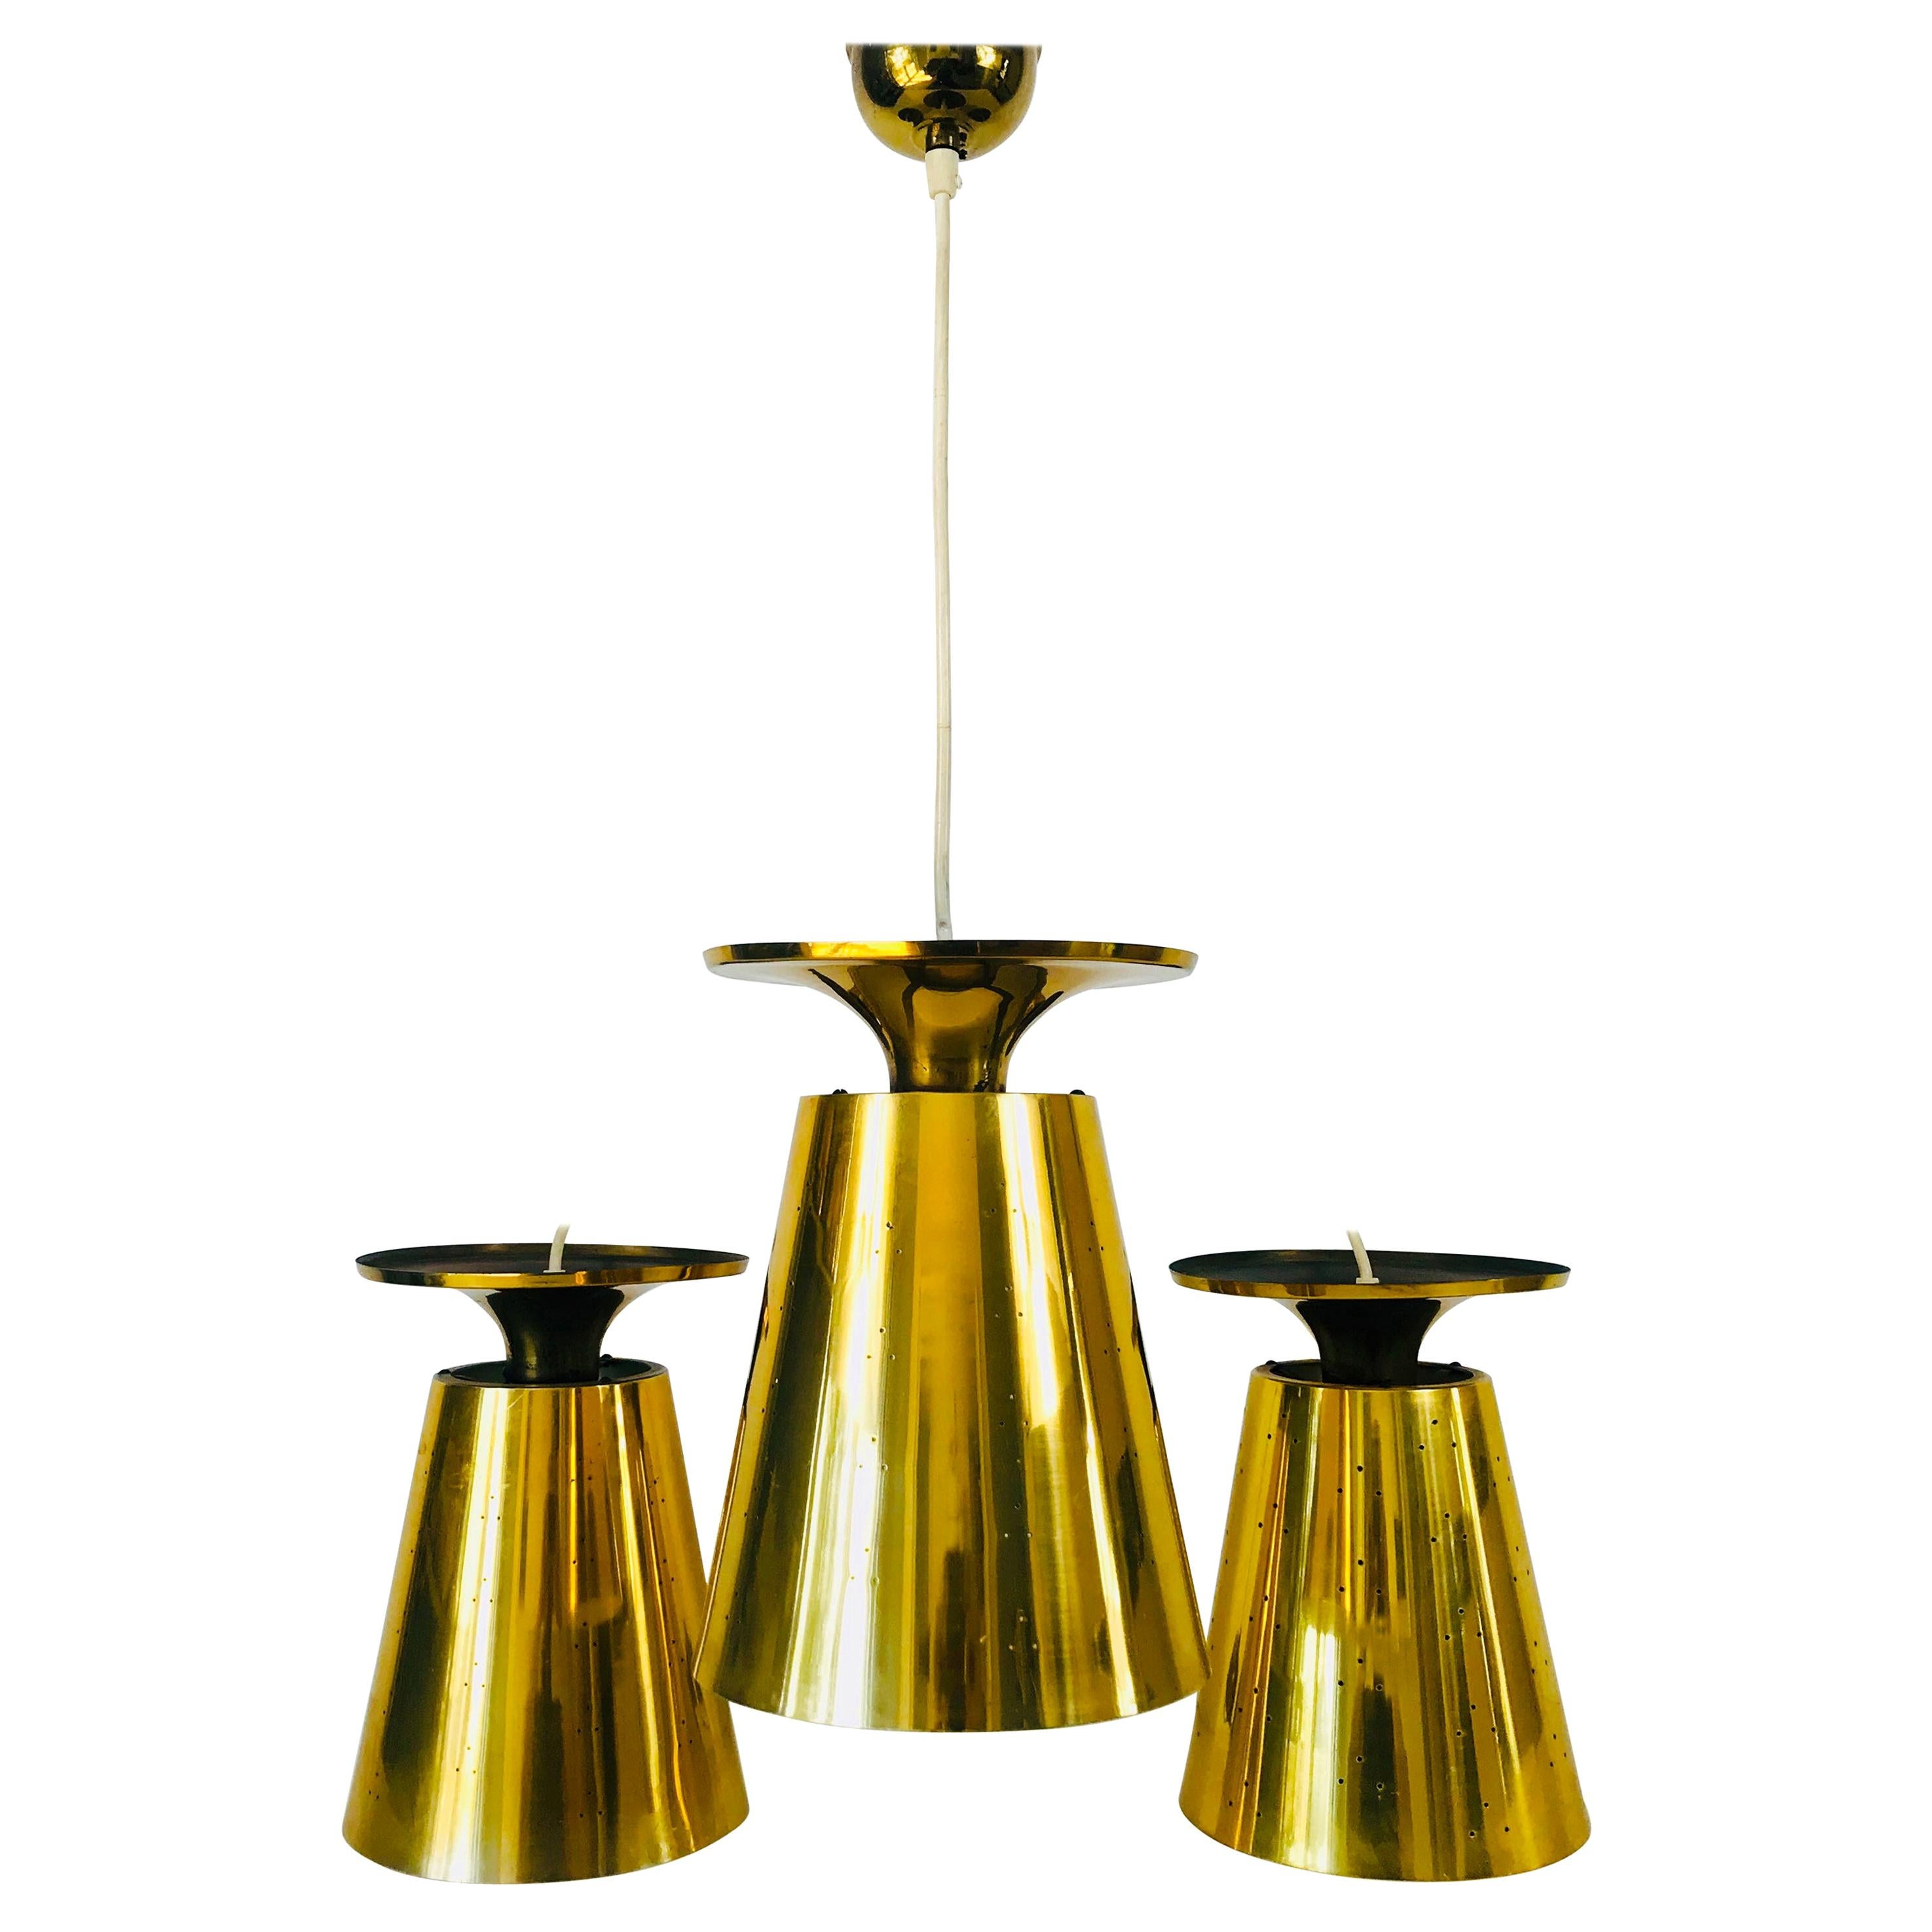 Set of 3 Polished Brass Pendant Lamps Attributed to Paavo Tynell, 1950s For Sale